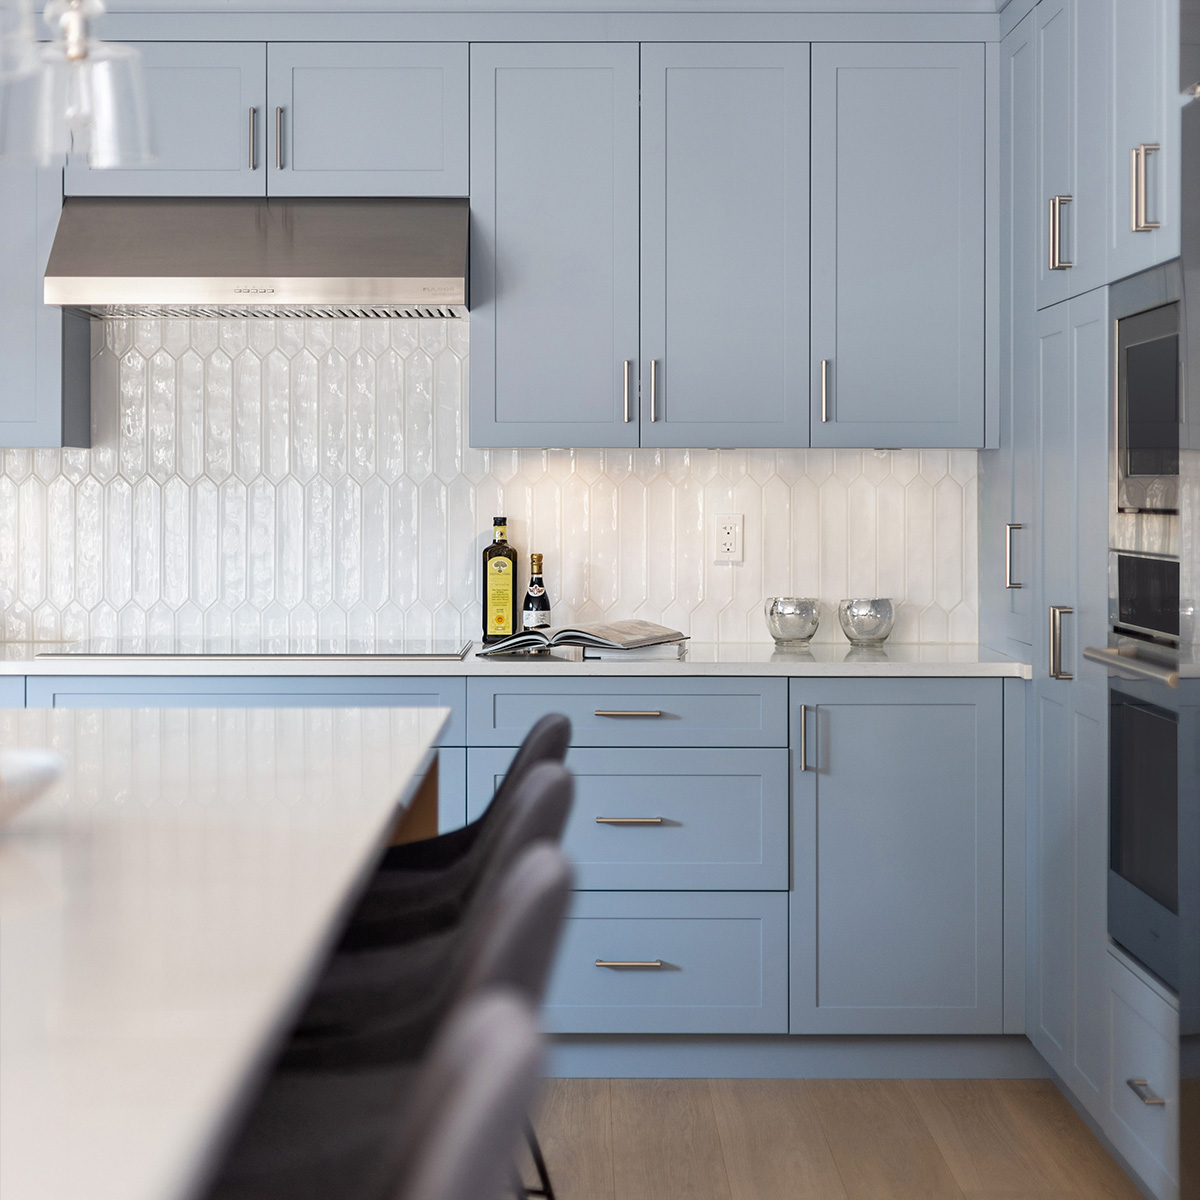 A kitchen with blue cabinets and a white counter top.

